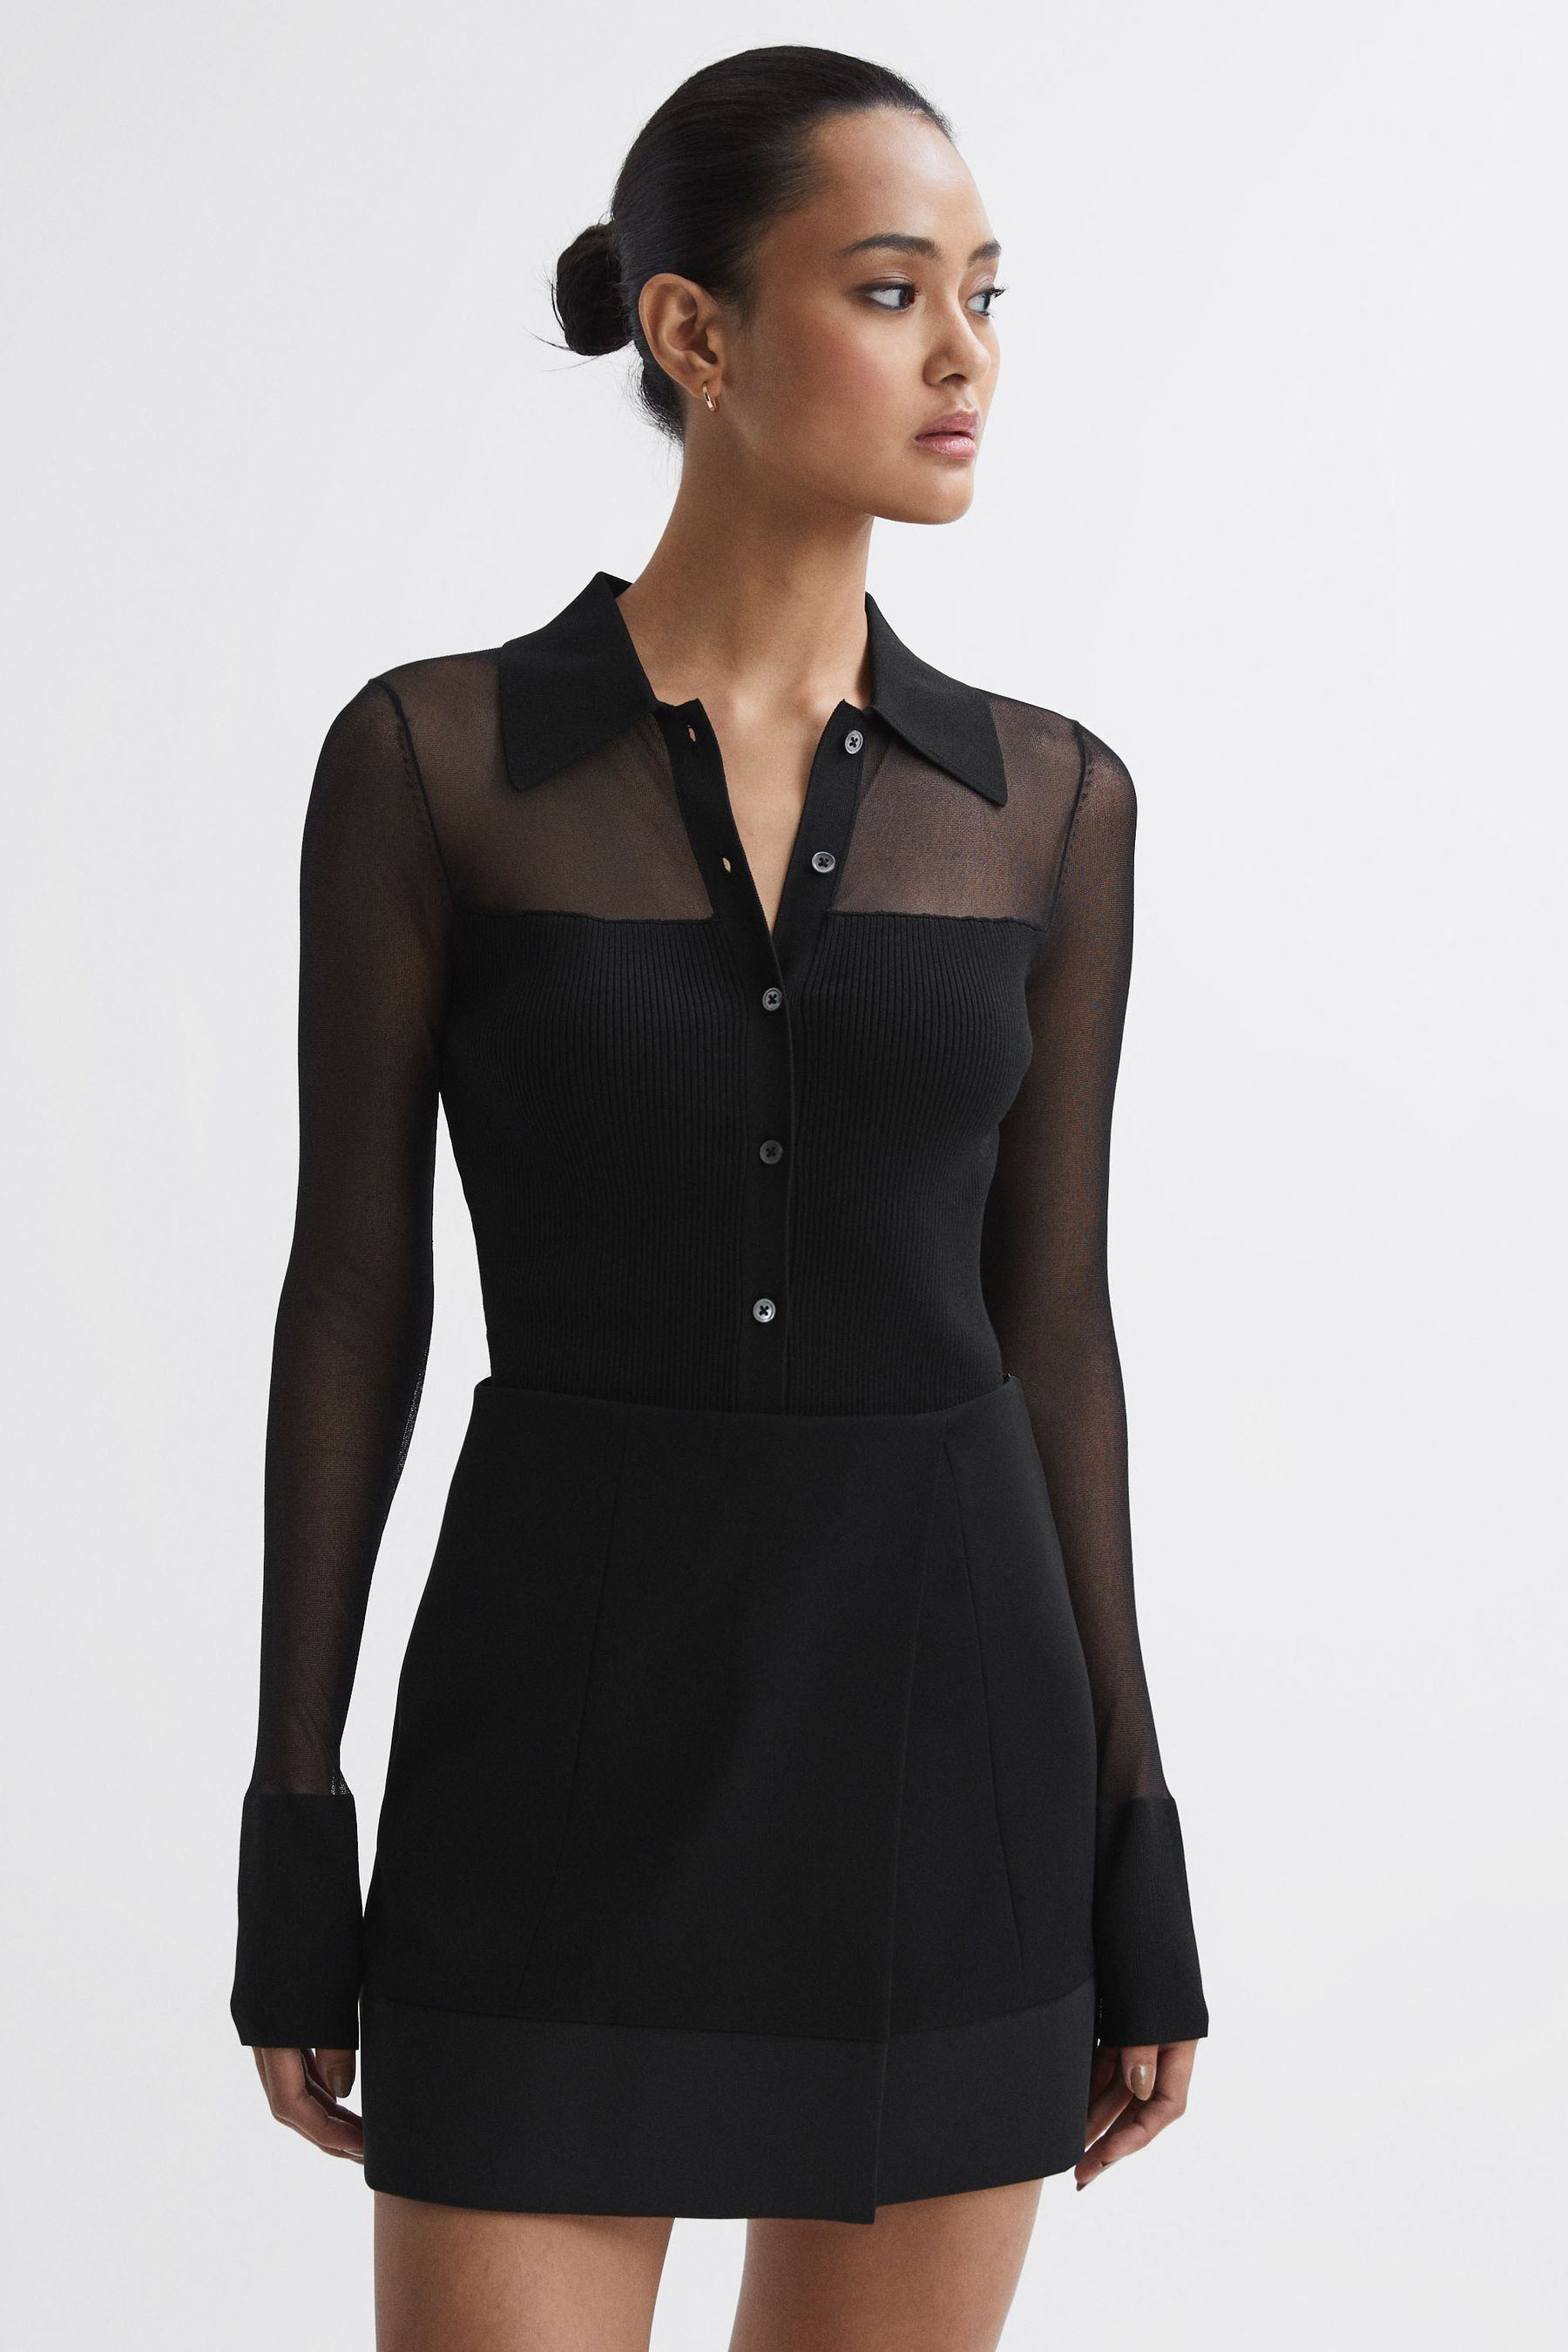 Reiss Nelly - Black Sheer Knitted Button-through Top, M